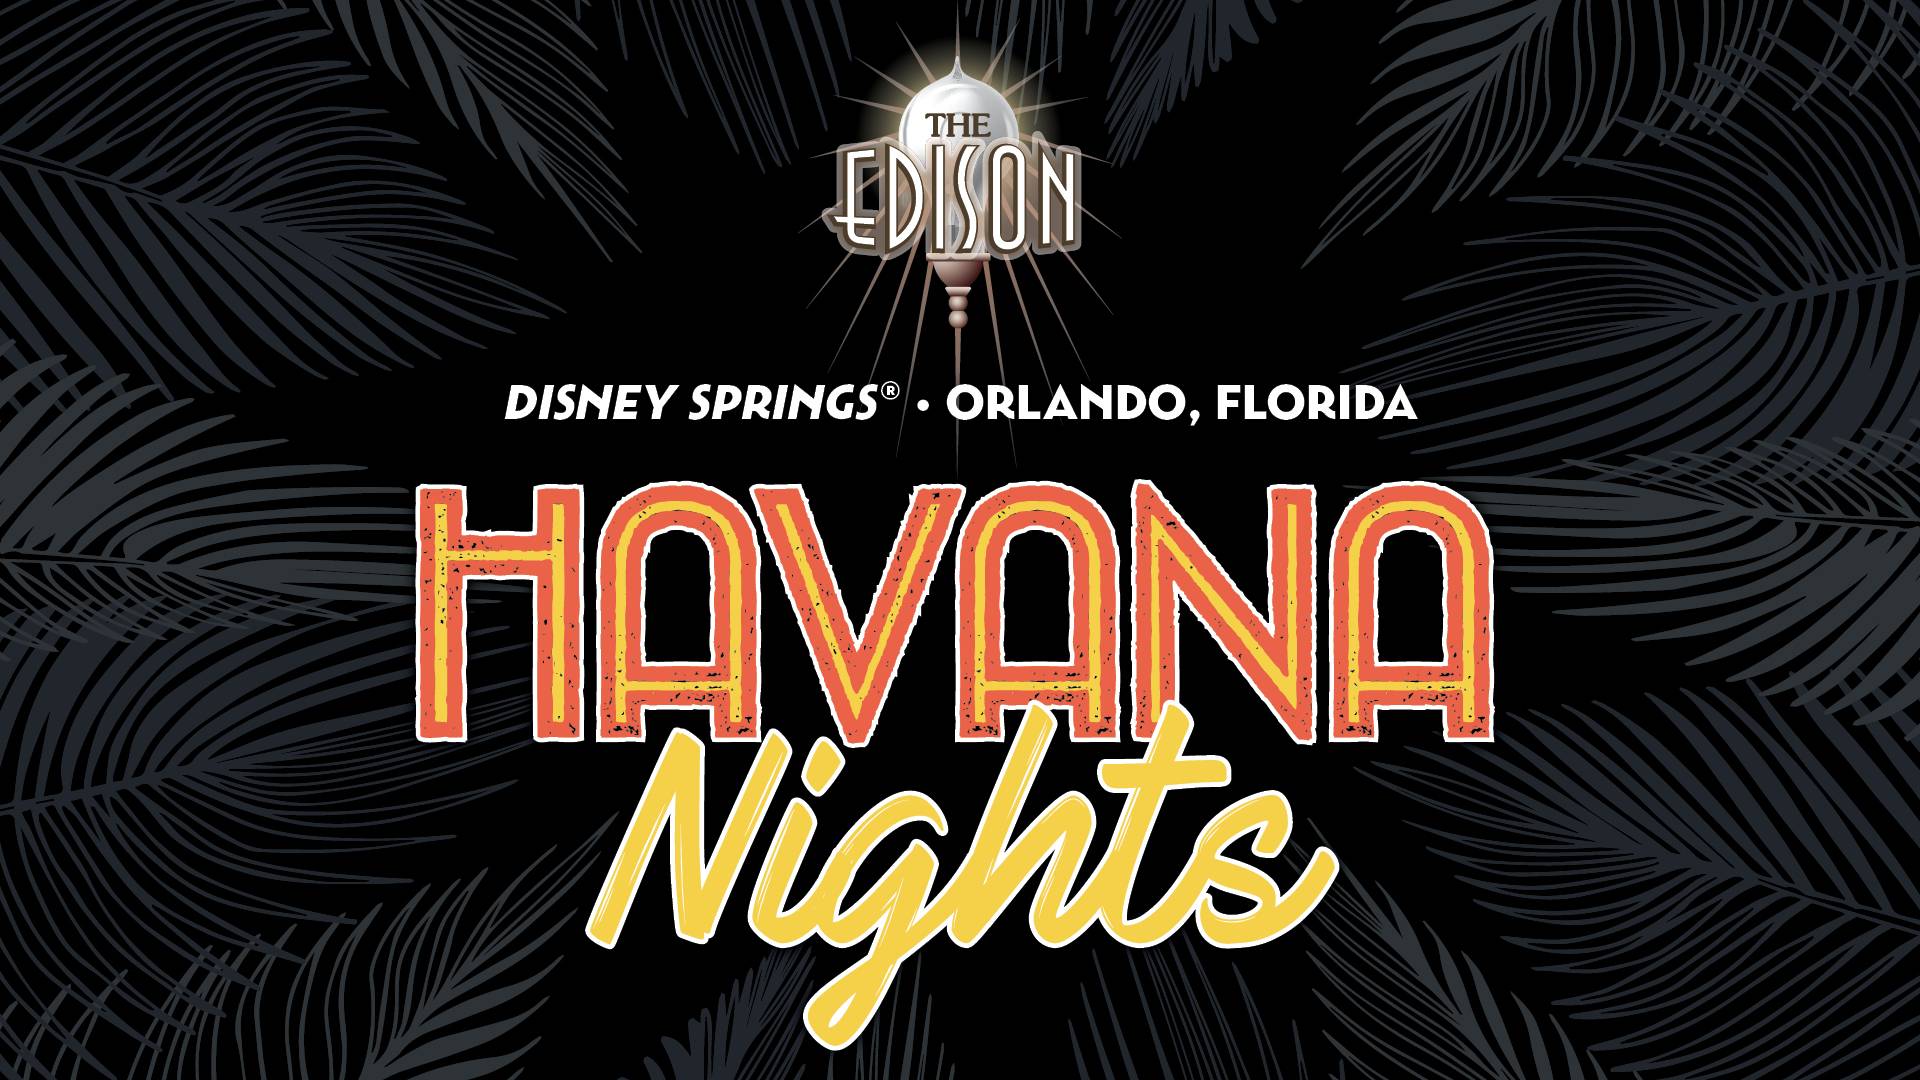 Havana Nights at The Edison combines Latin music, salsa dancing, and specialty craft cocktails